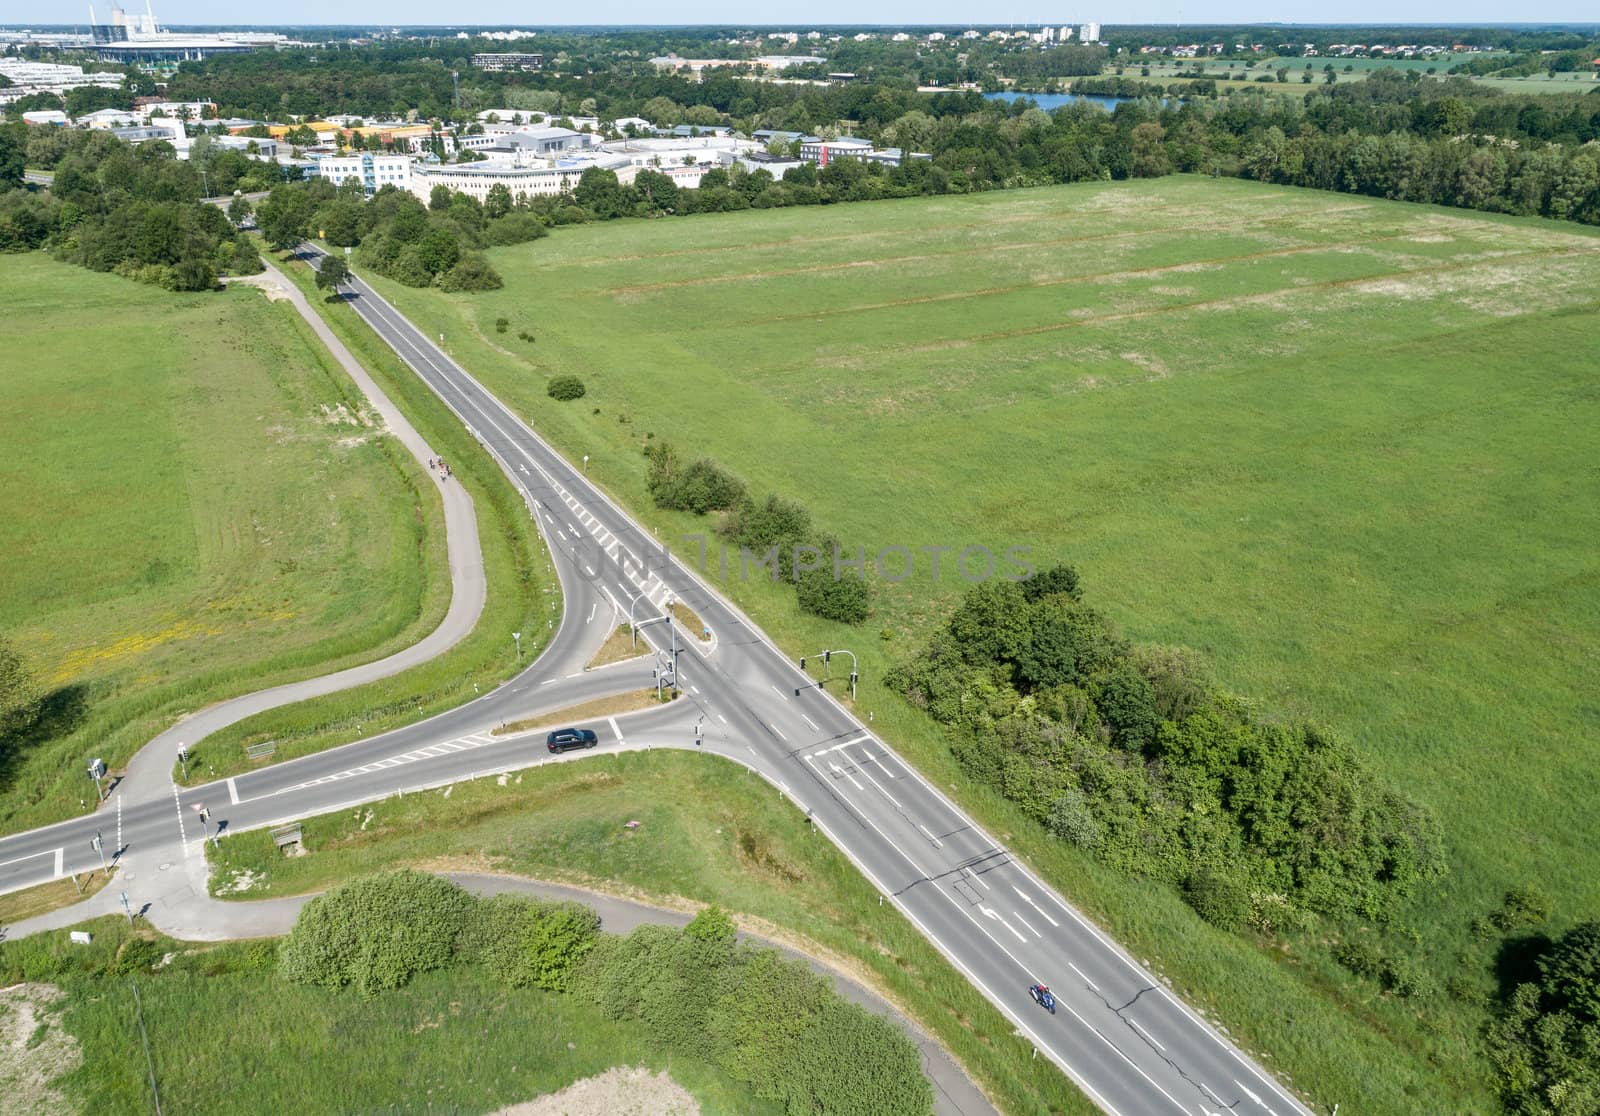 Aerial view of the turn-off of a ring road with the houses of the dominion in the background, near Wolfsburg